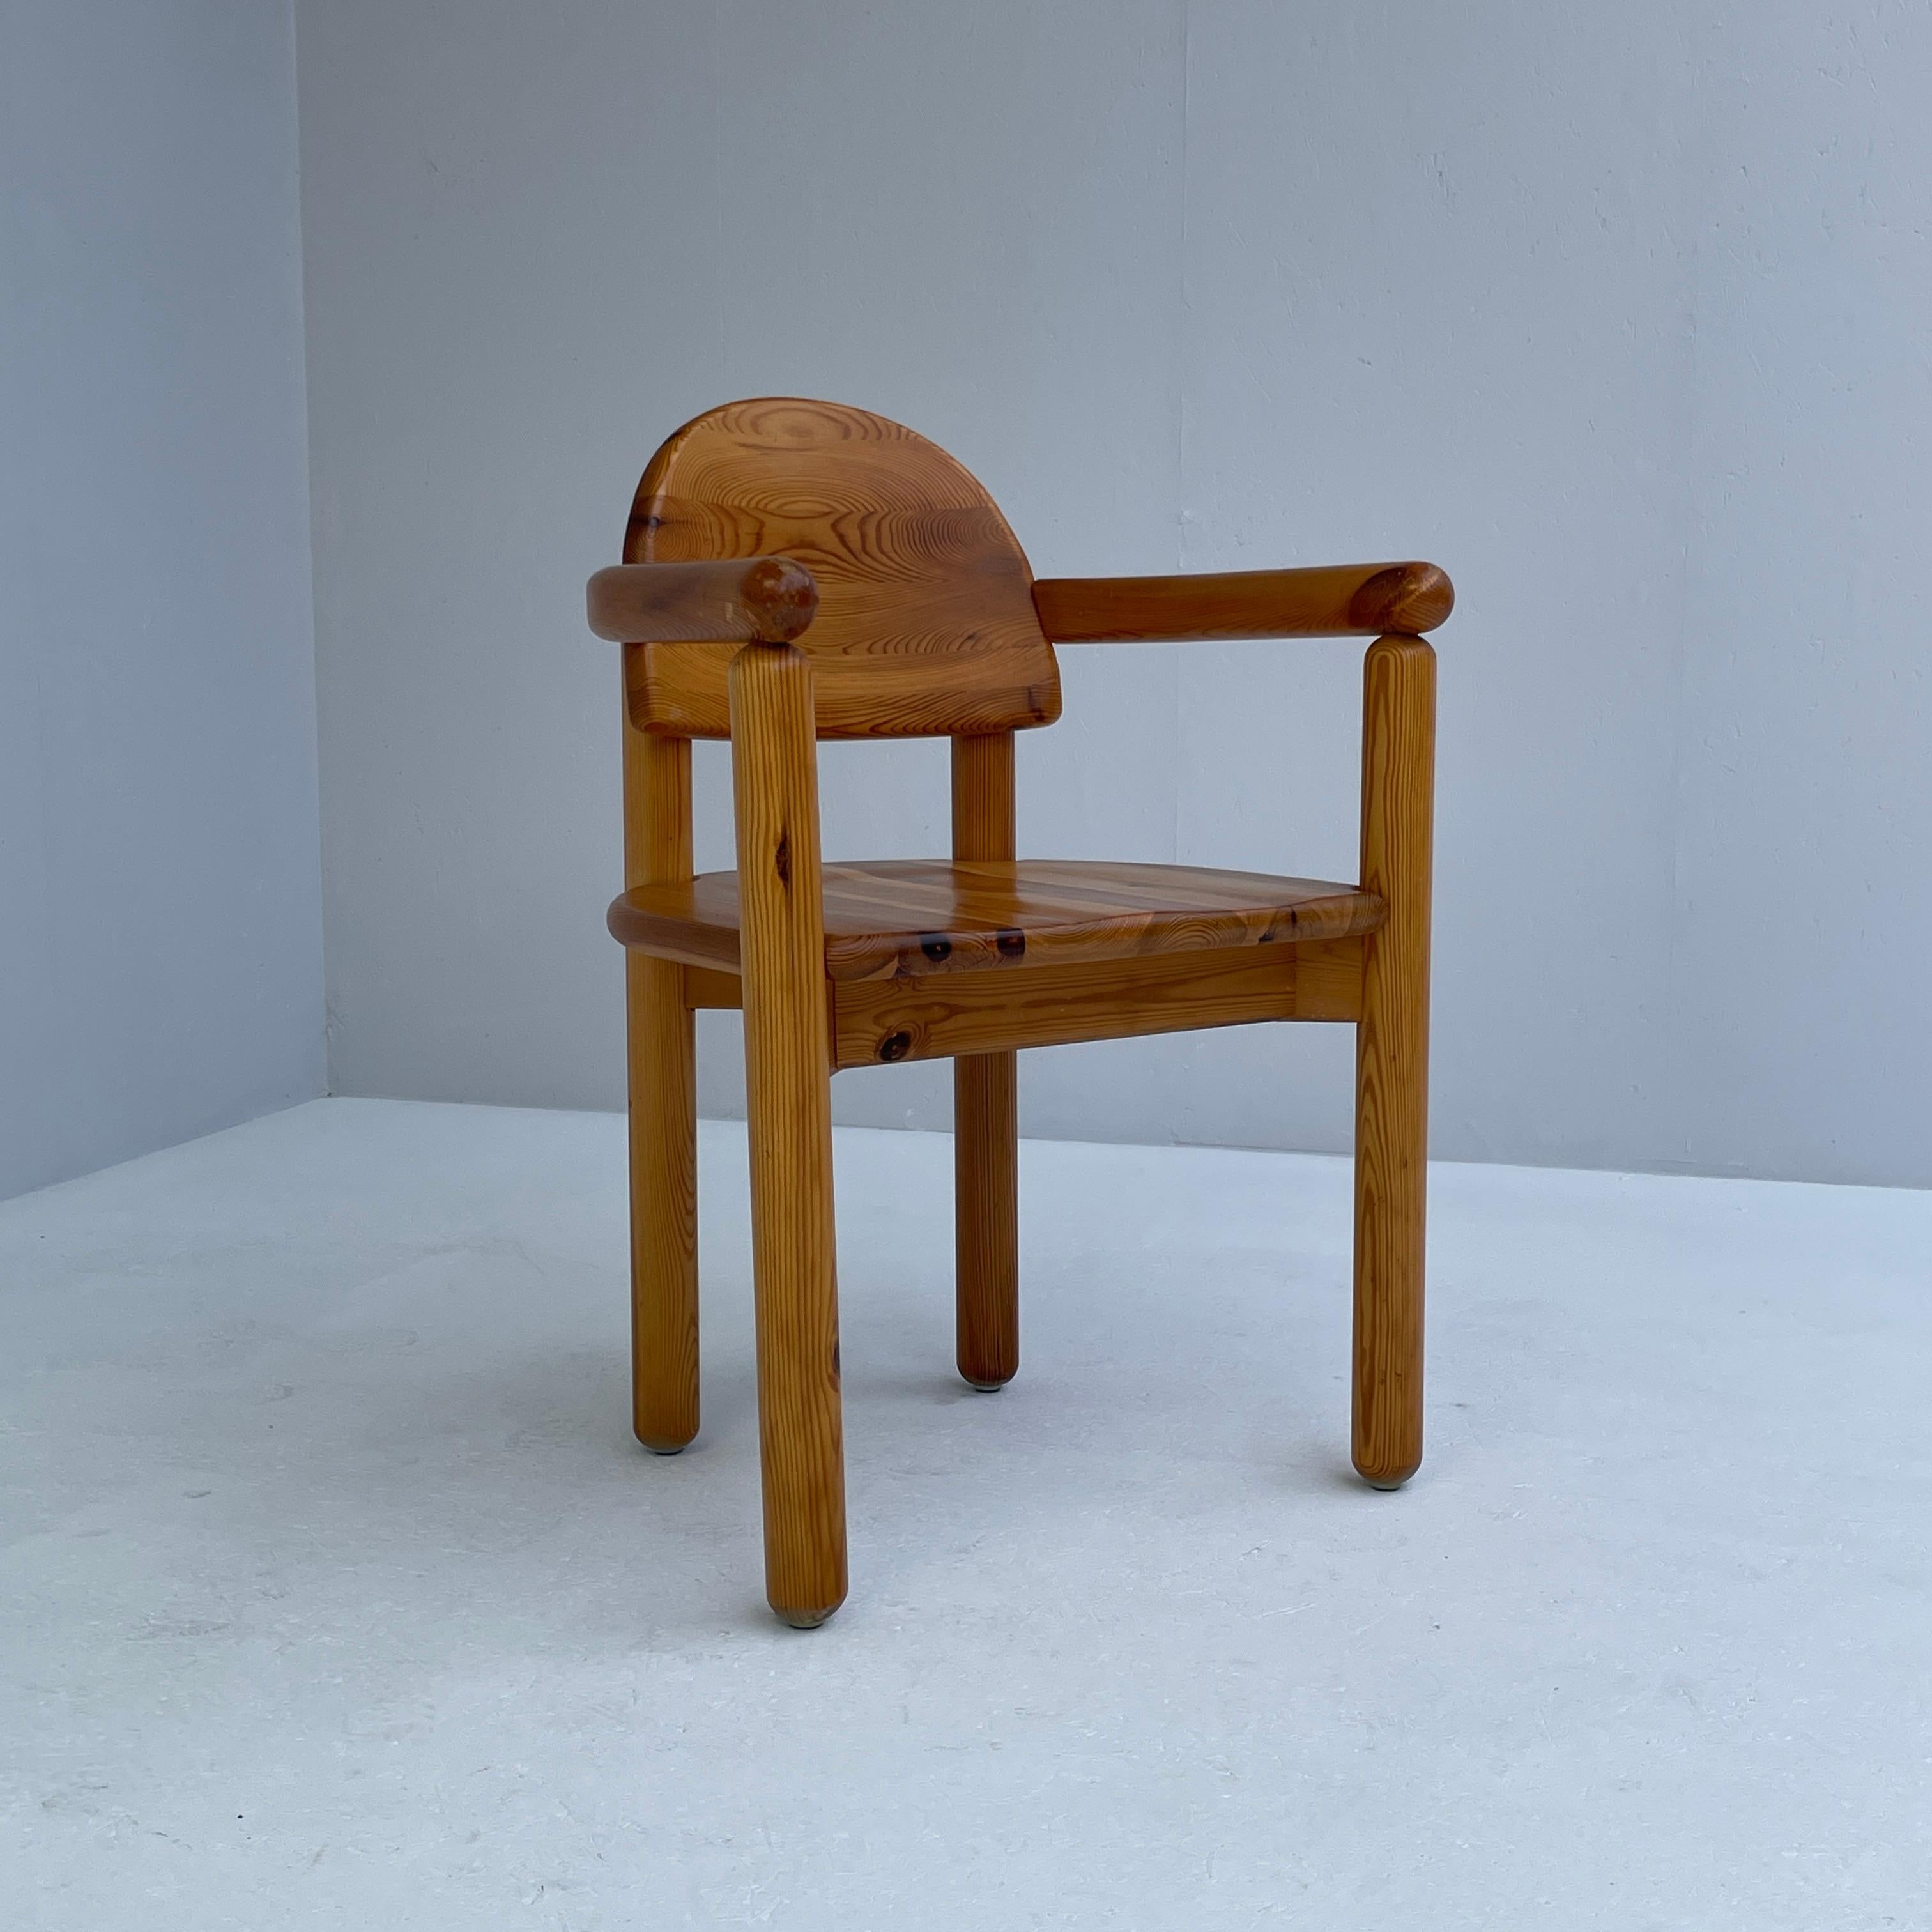 Pinewood Daumiller chair with arms in good condition. 
Dimensions are H81 x W46 x D45 x SH47 cm